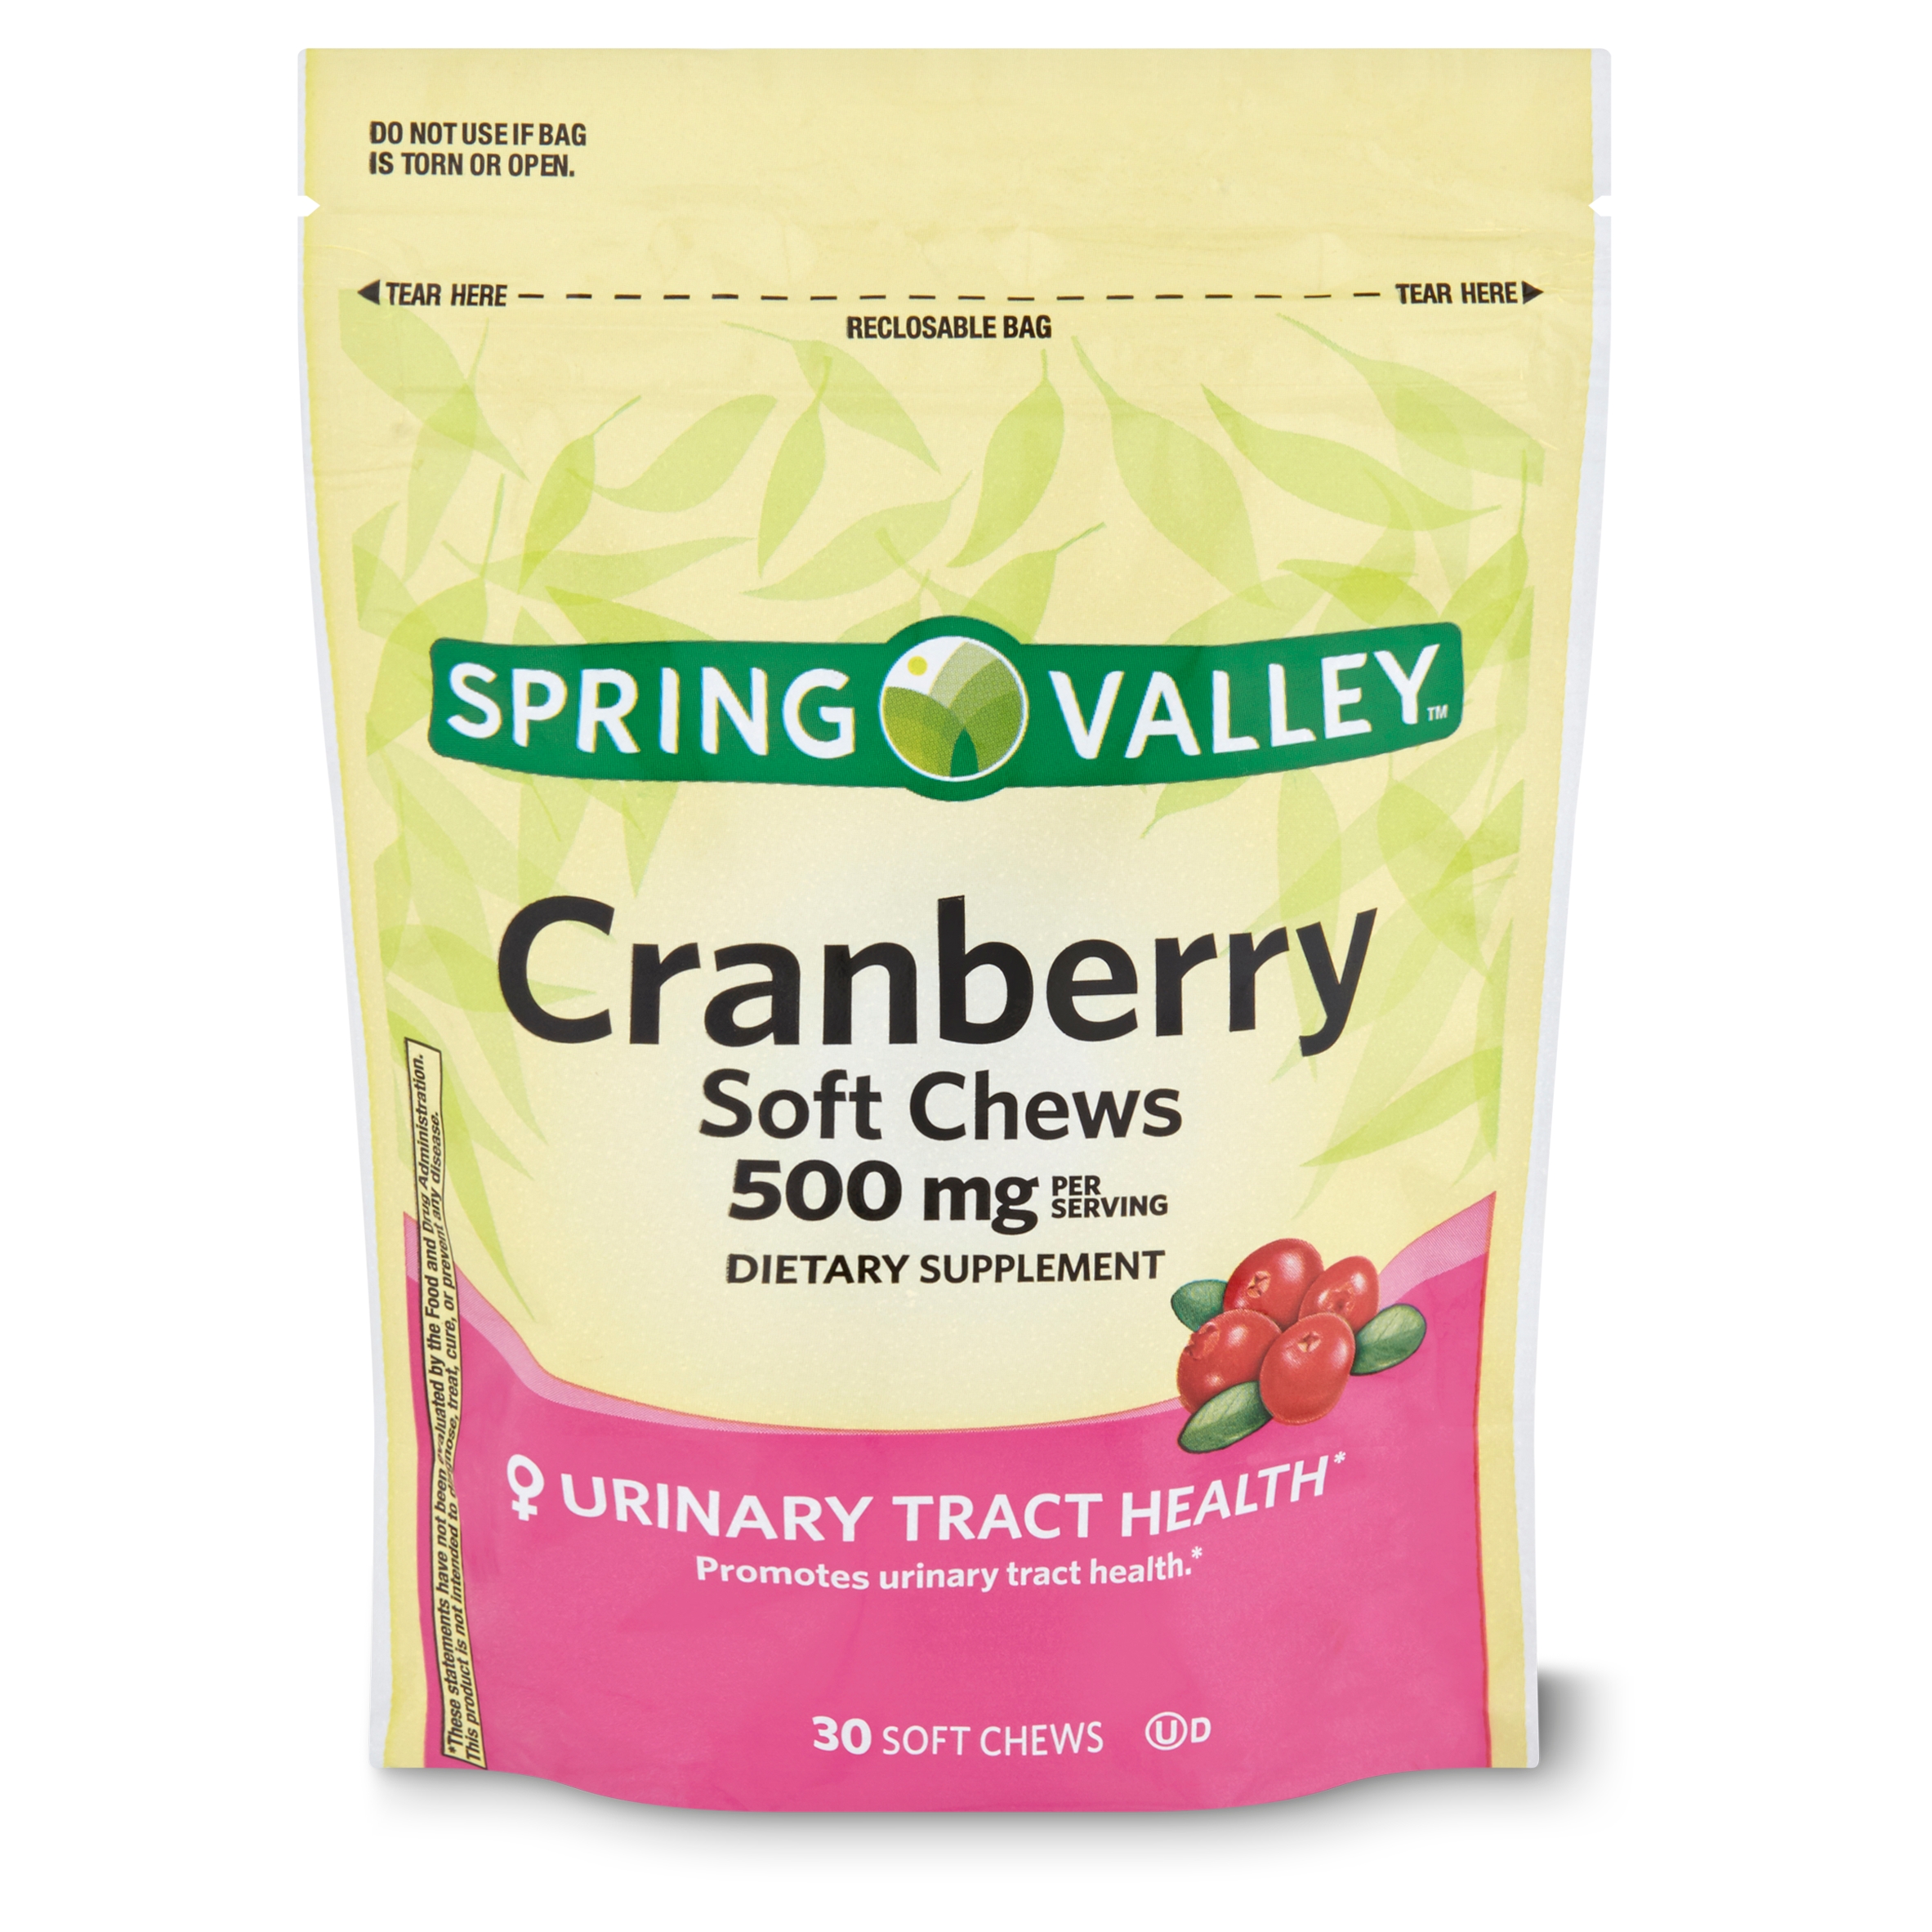 Spring Valley Cranberry Urinary Tract Health Dietary Supplement Soft Chews, 500 mg, 30 Count - image 3 of 9